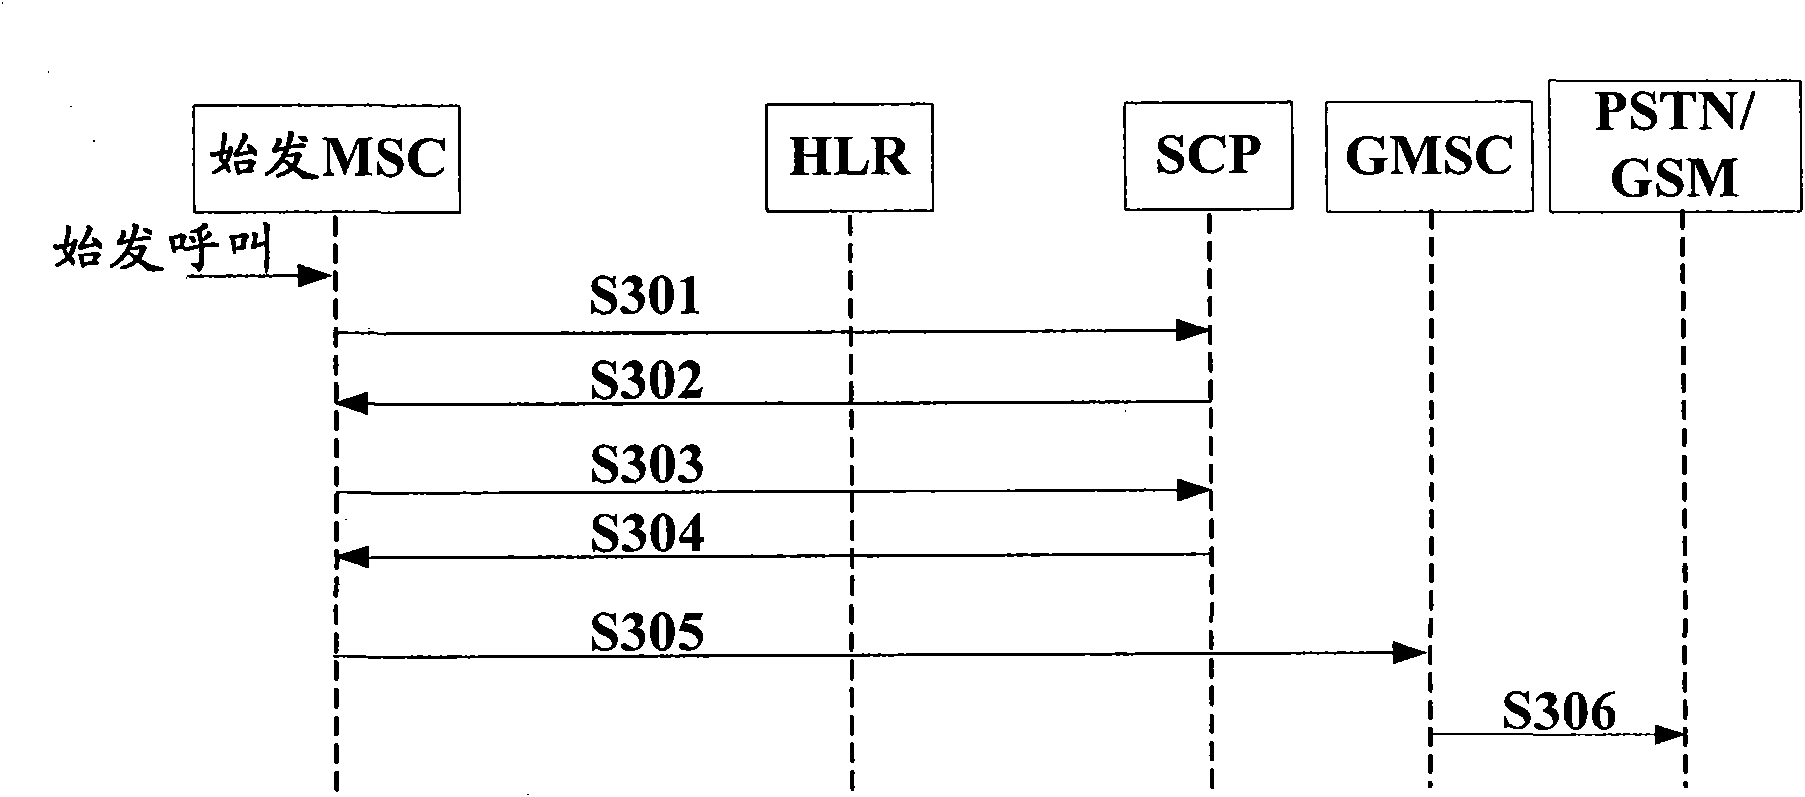 Calling number transformation method, system and service control point